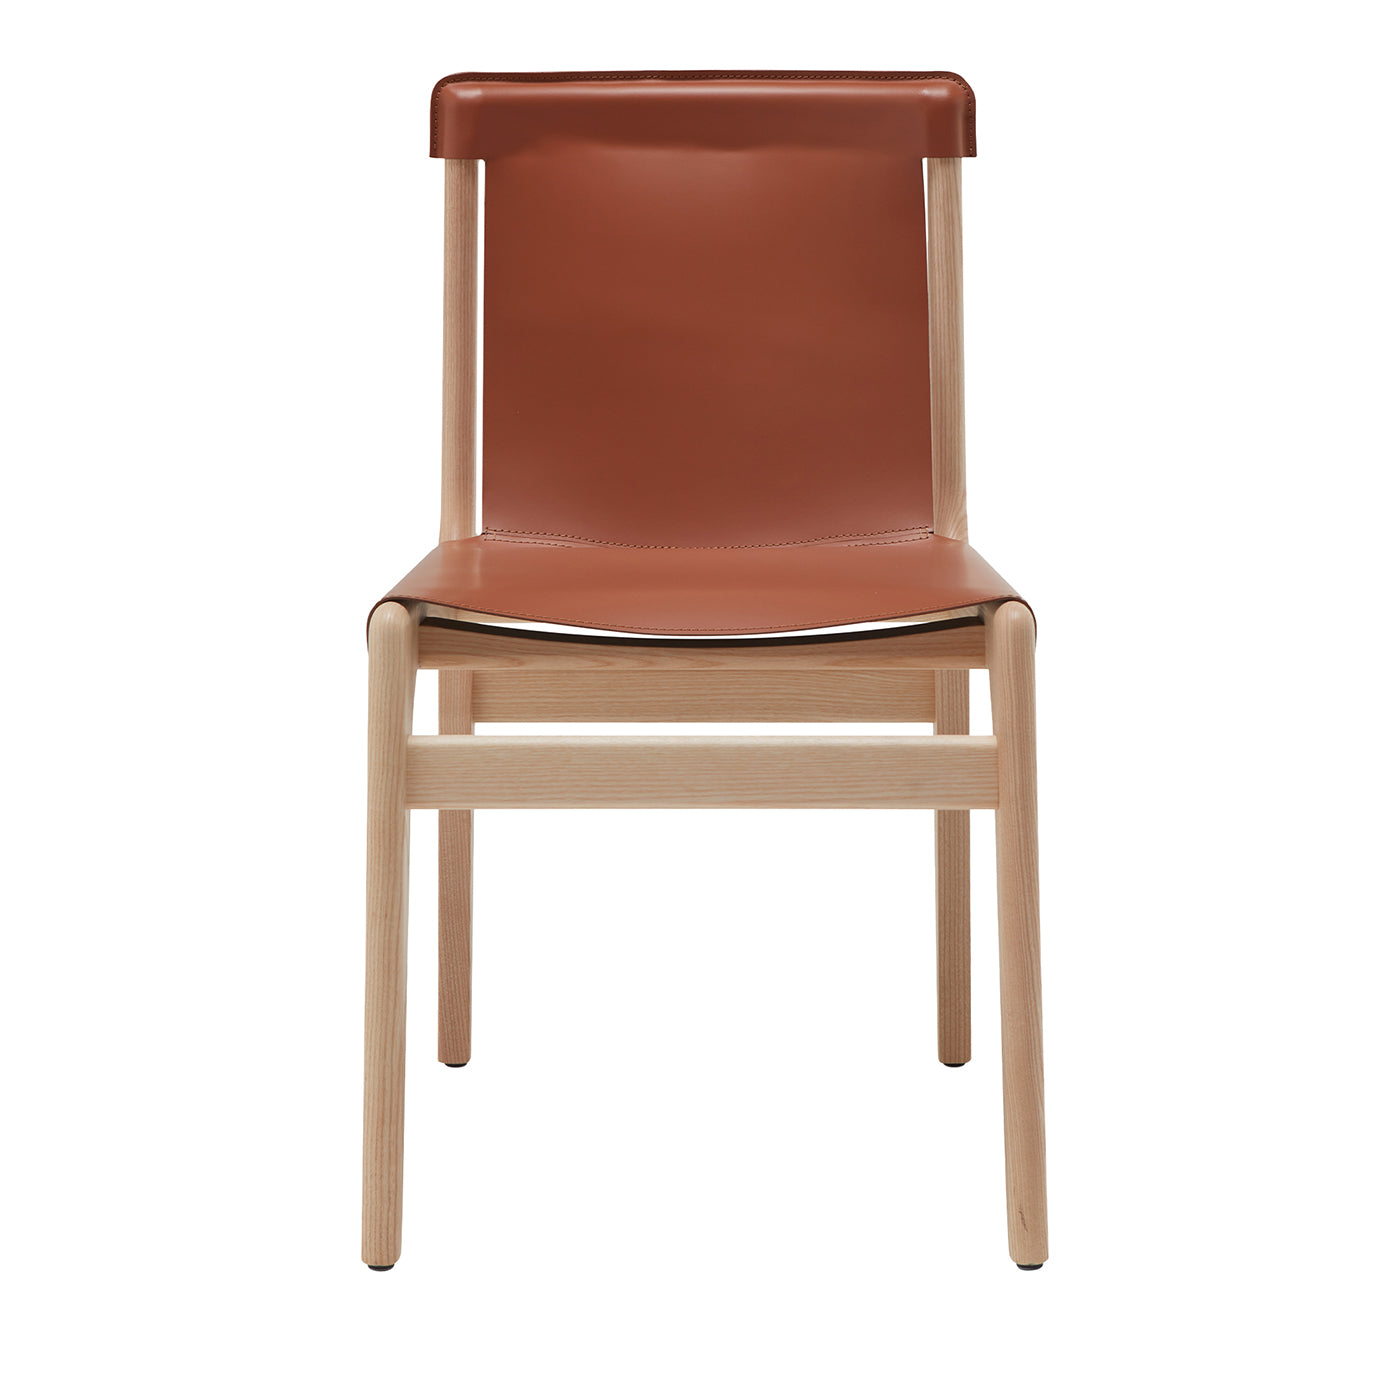 Burano Leather Chair by Balutto Associati - Main view